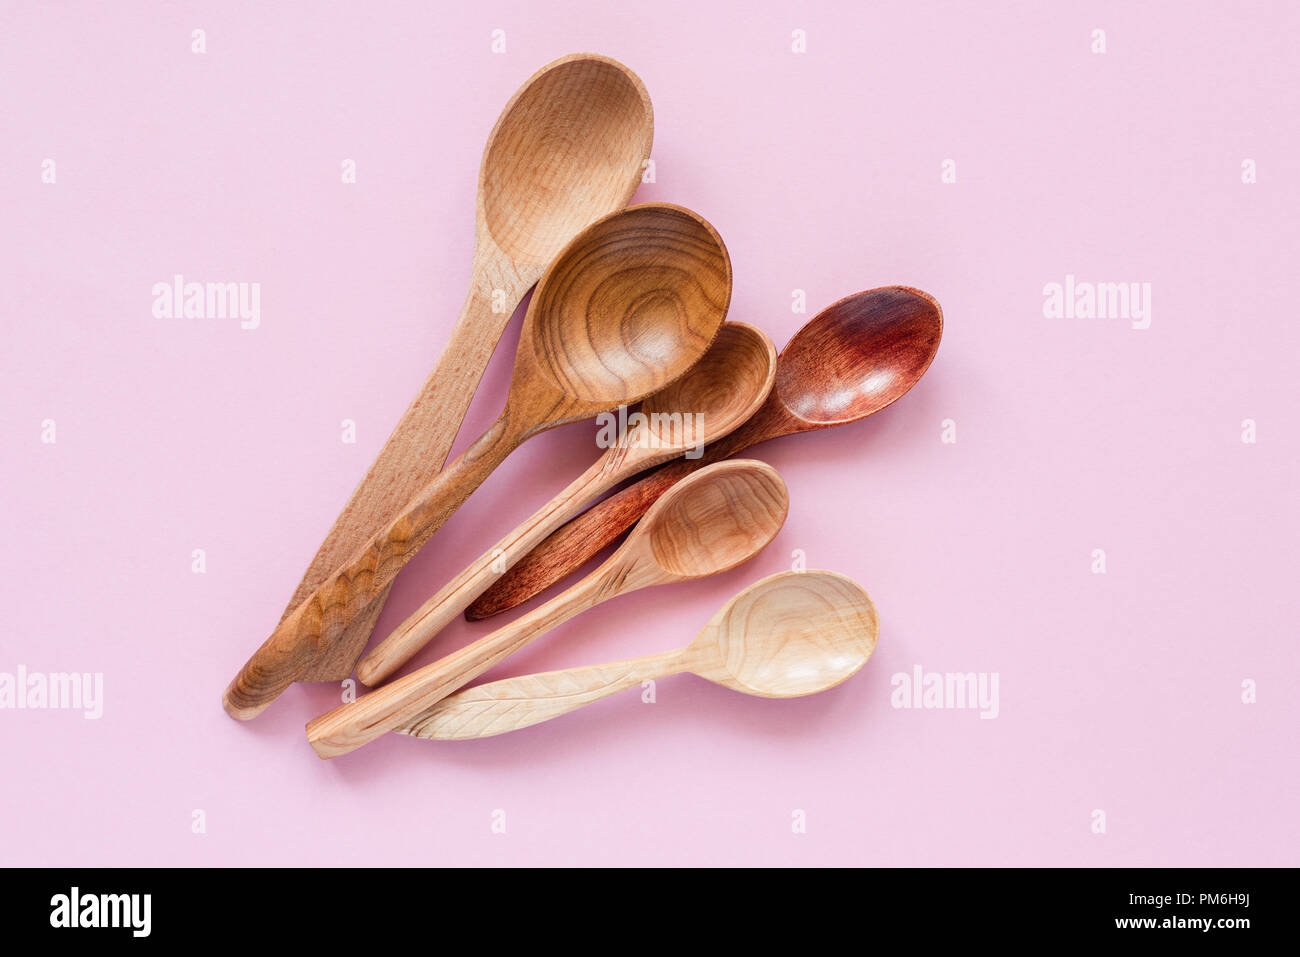 Wooden Spoons On Pink Background. Trendy Kitchen Utensils, Environmentally Friendly Eco Bamboo Spoons Stock Photo